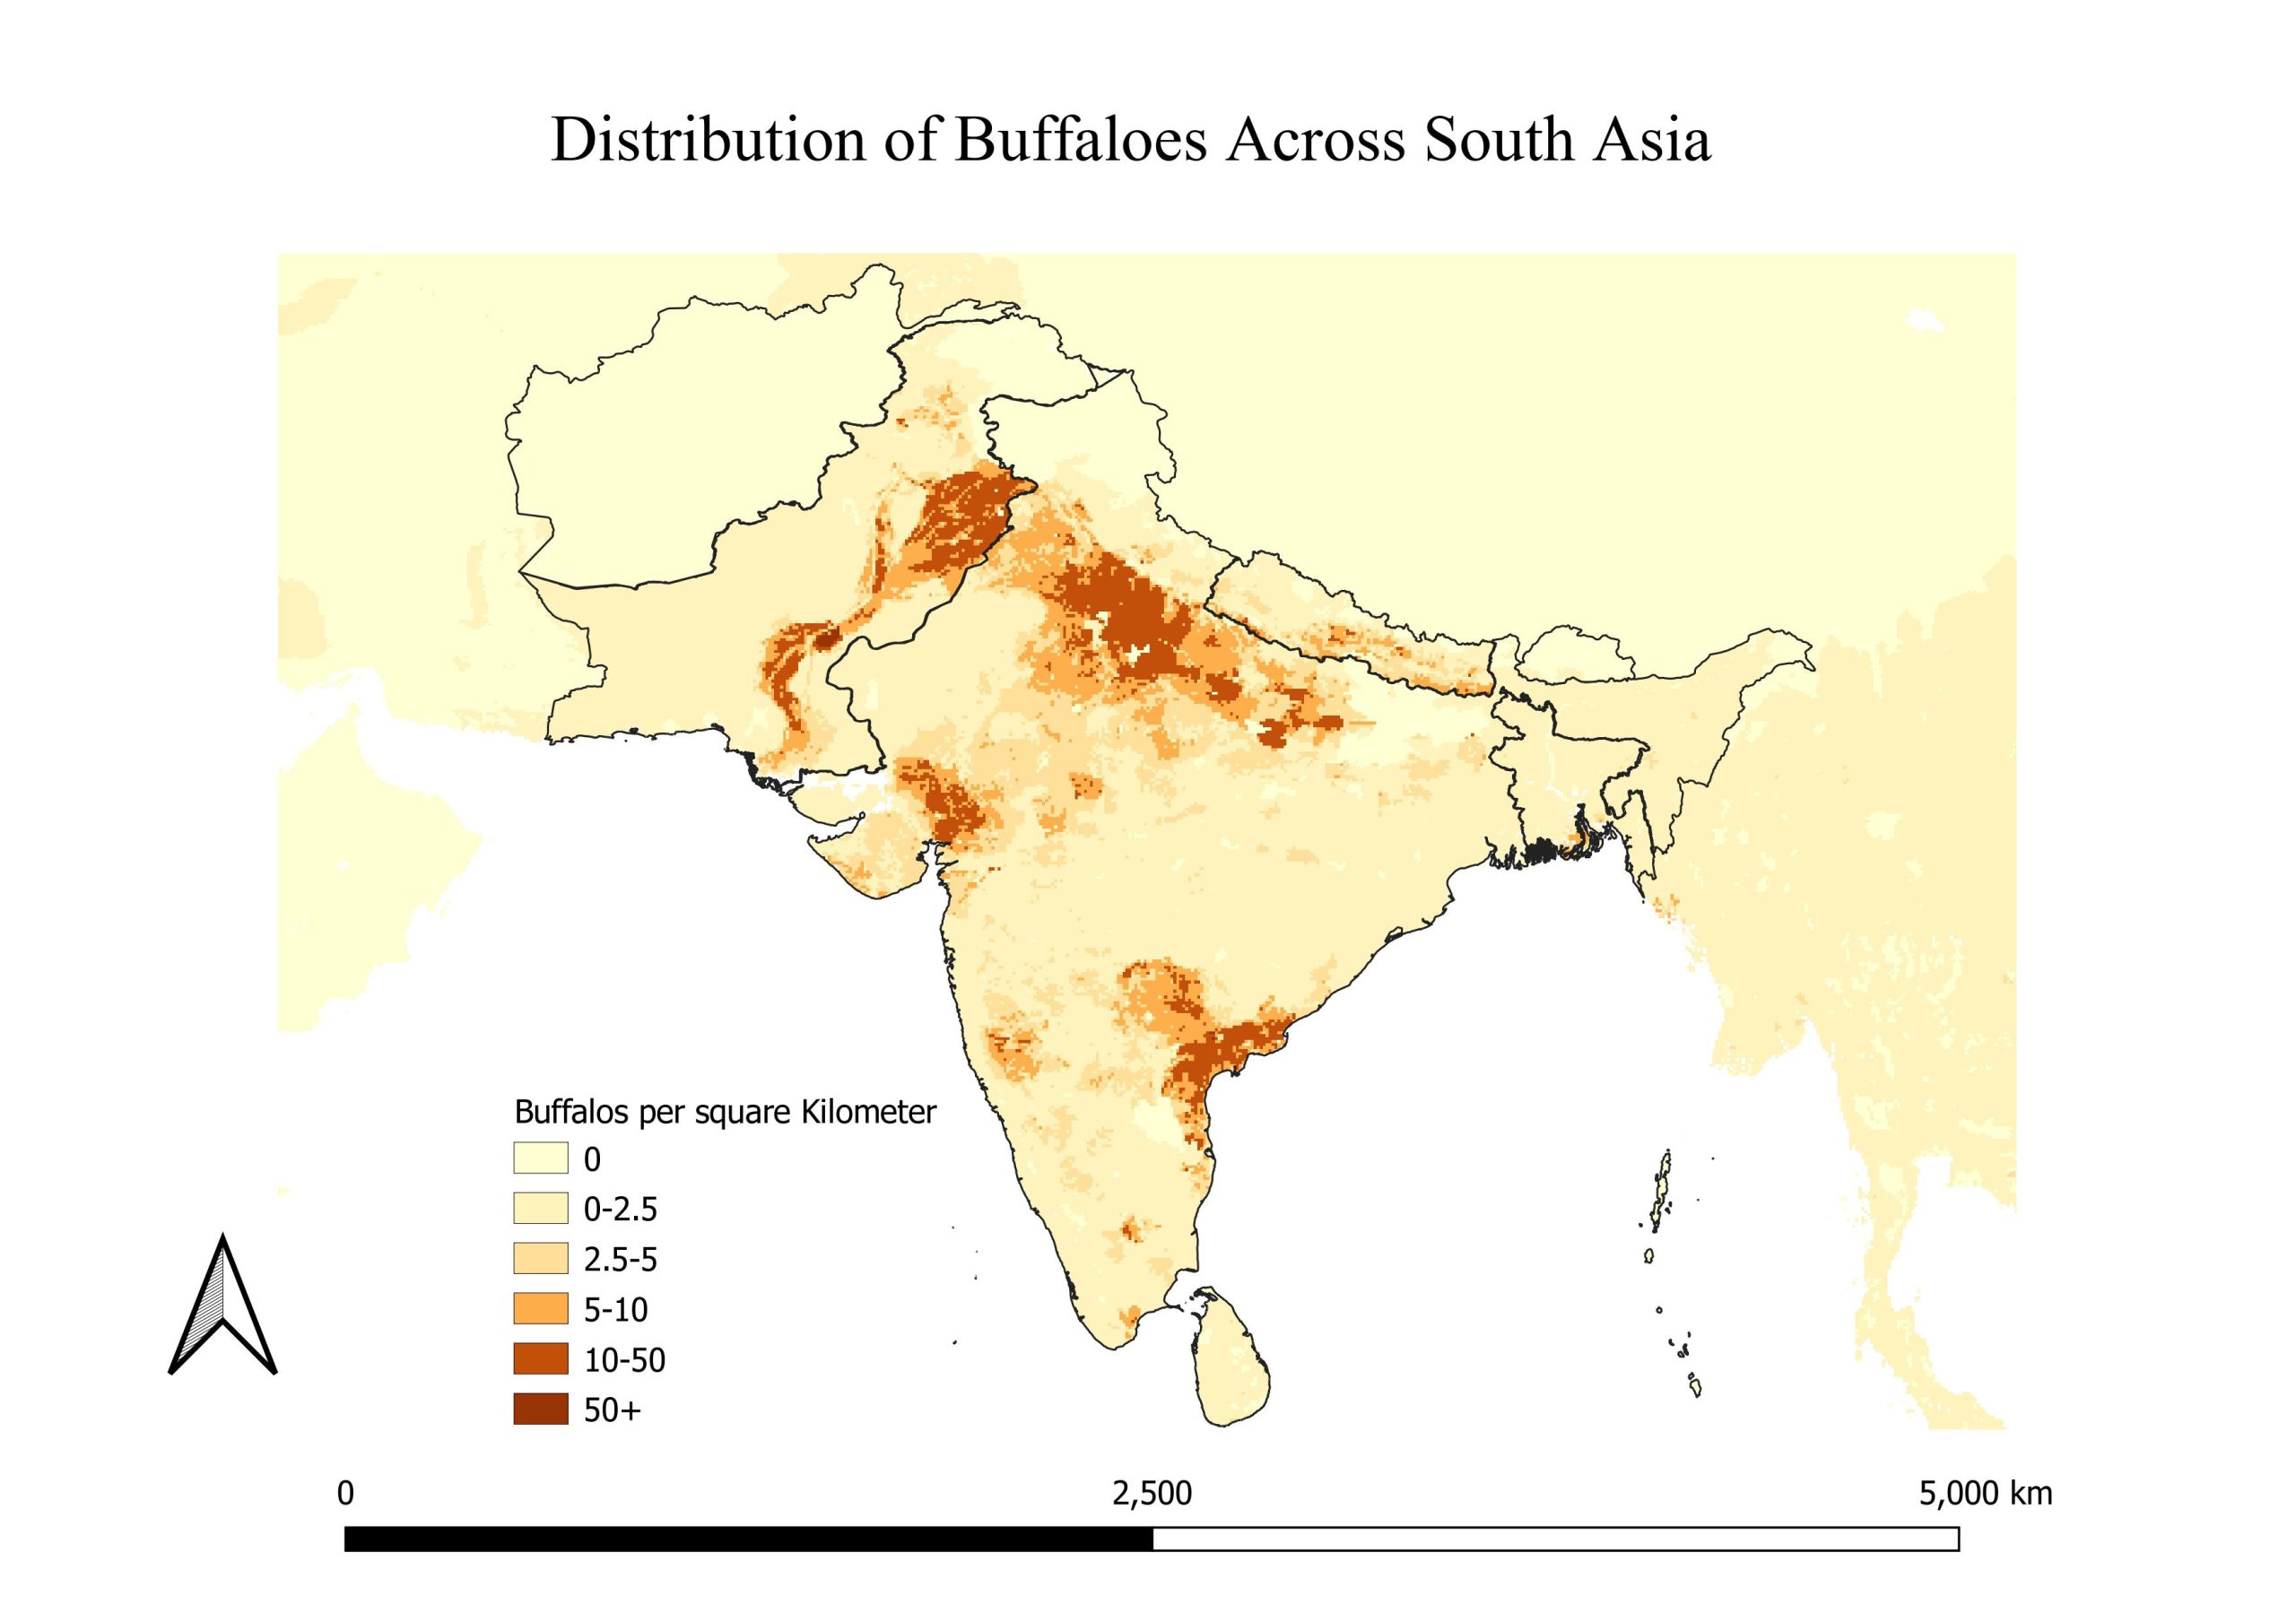 Map showing the distribution of buffalos per sq. km in India and Pakistan, with the highest concentrations in Punjab province in Pakistan and Gujarat, Uttar Pradesh and Andhra Pradesh states in India